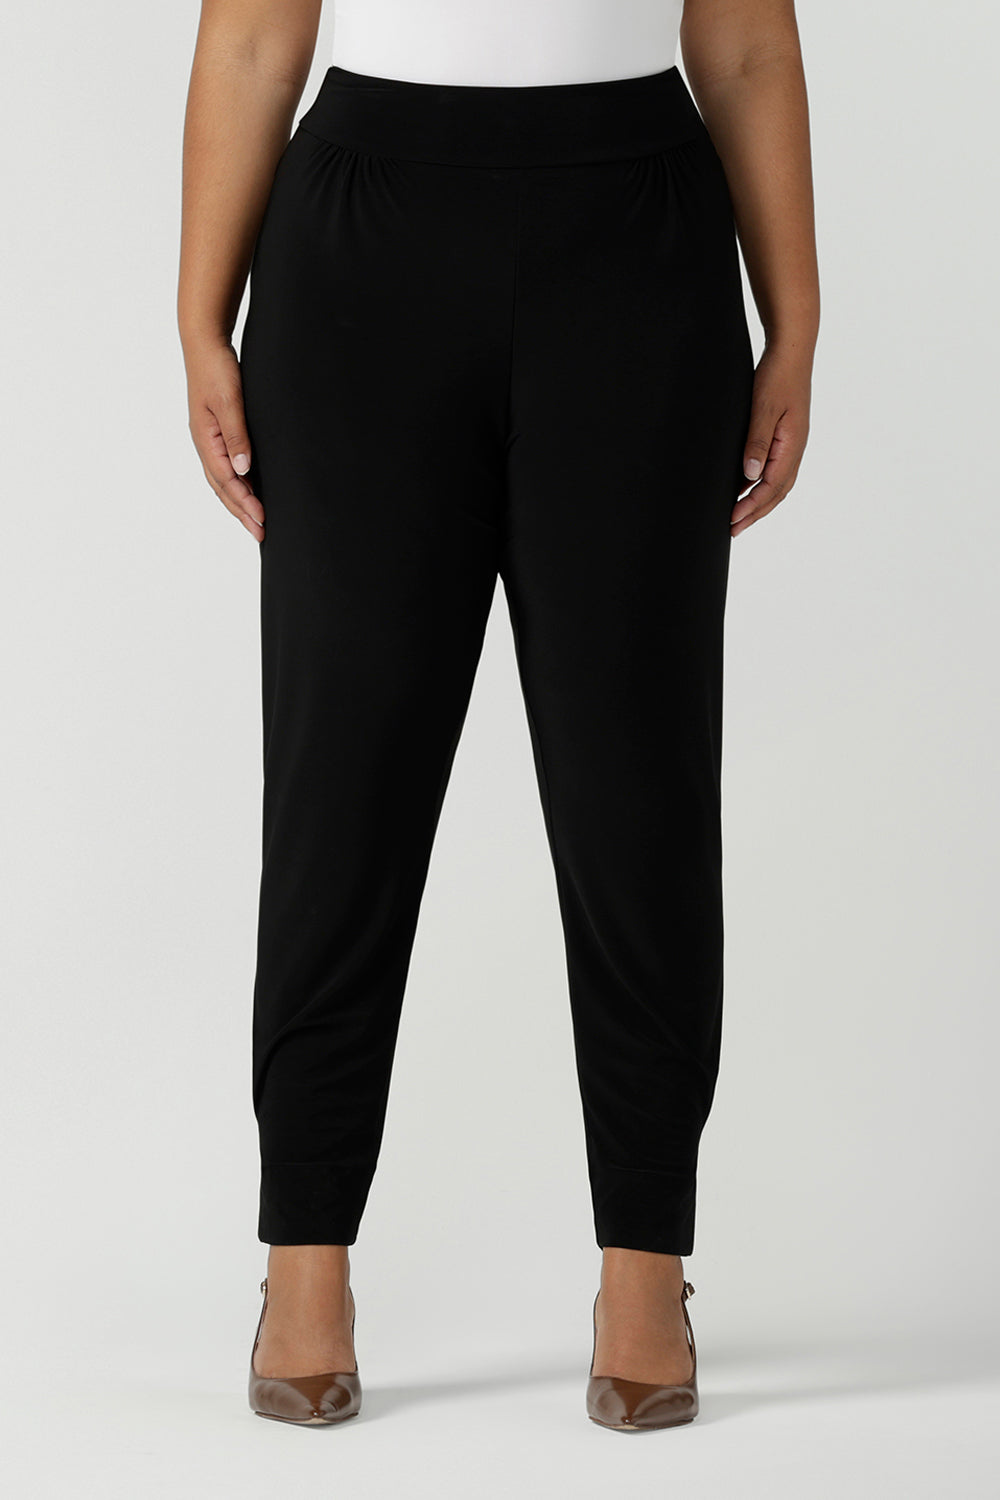 Designed as a full length travel pant for tall women. A size 18 curvy woman wears great pants for travel, these dropped crotch, single seam black pants are made stretchy jersey for ultimate comfort. Worn with a white bamboo jersey top , shop these comfy black pants for your travel and capsule wardrobe now!